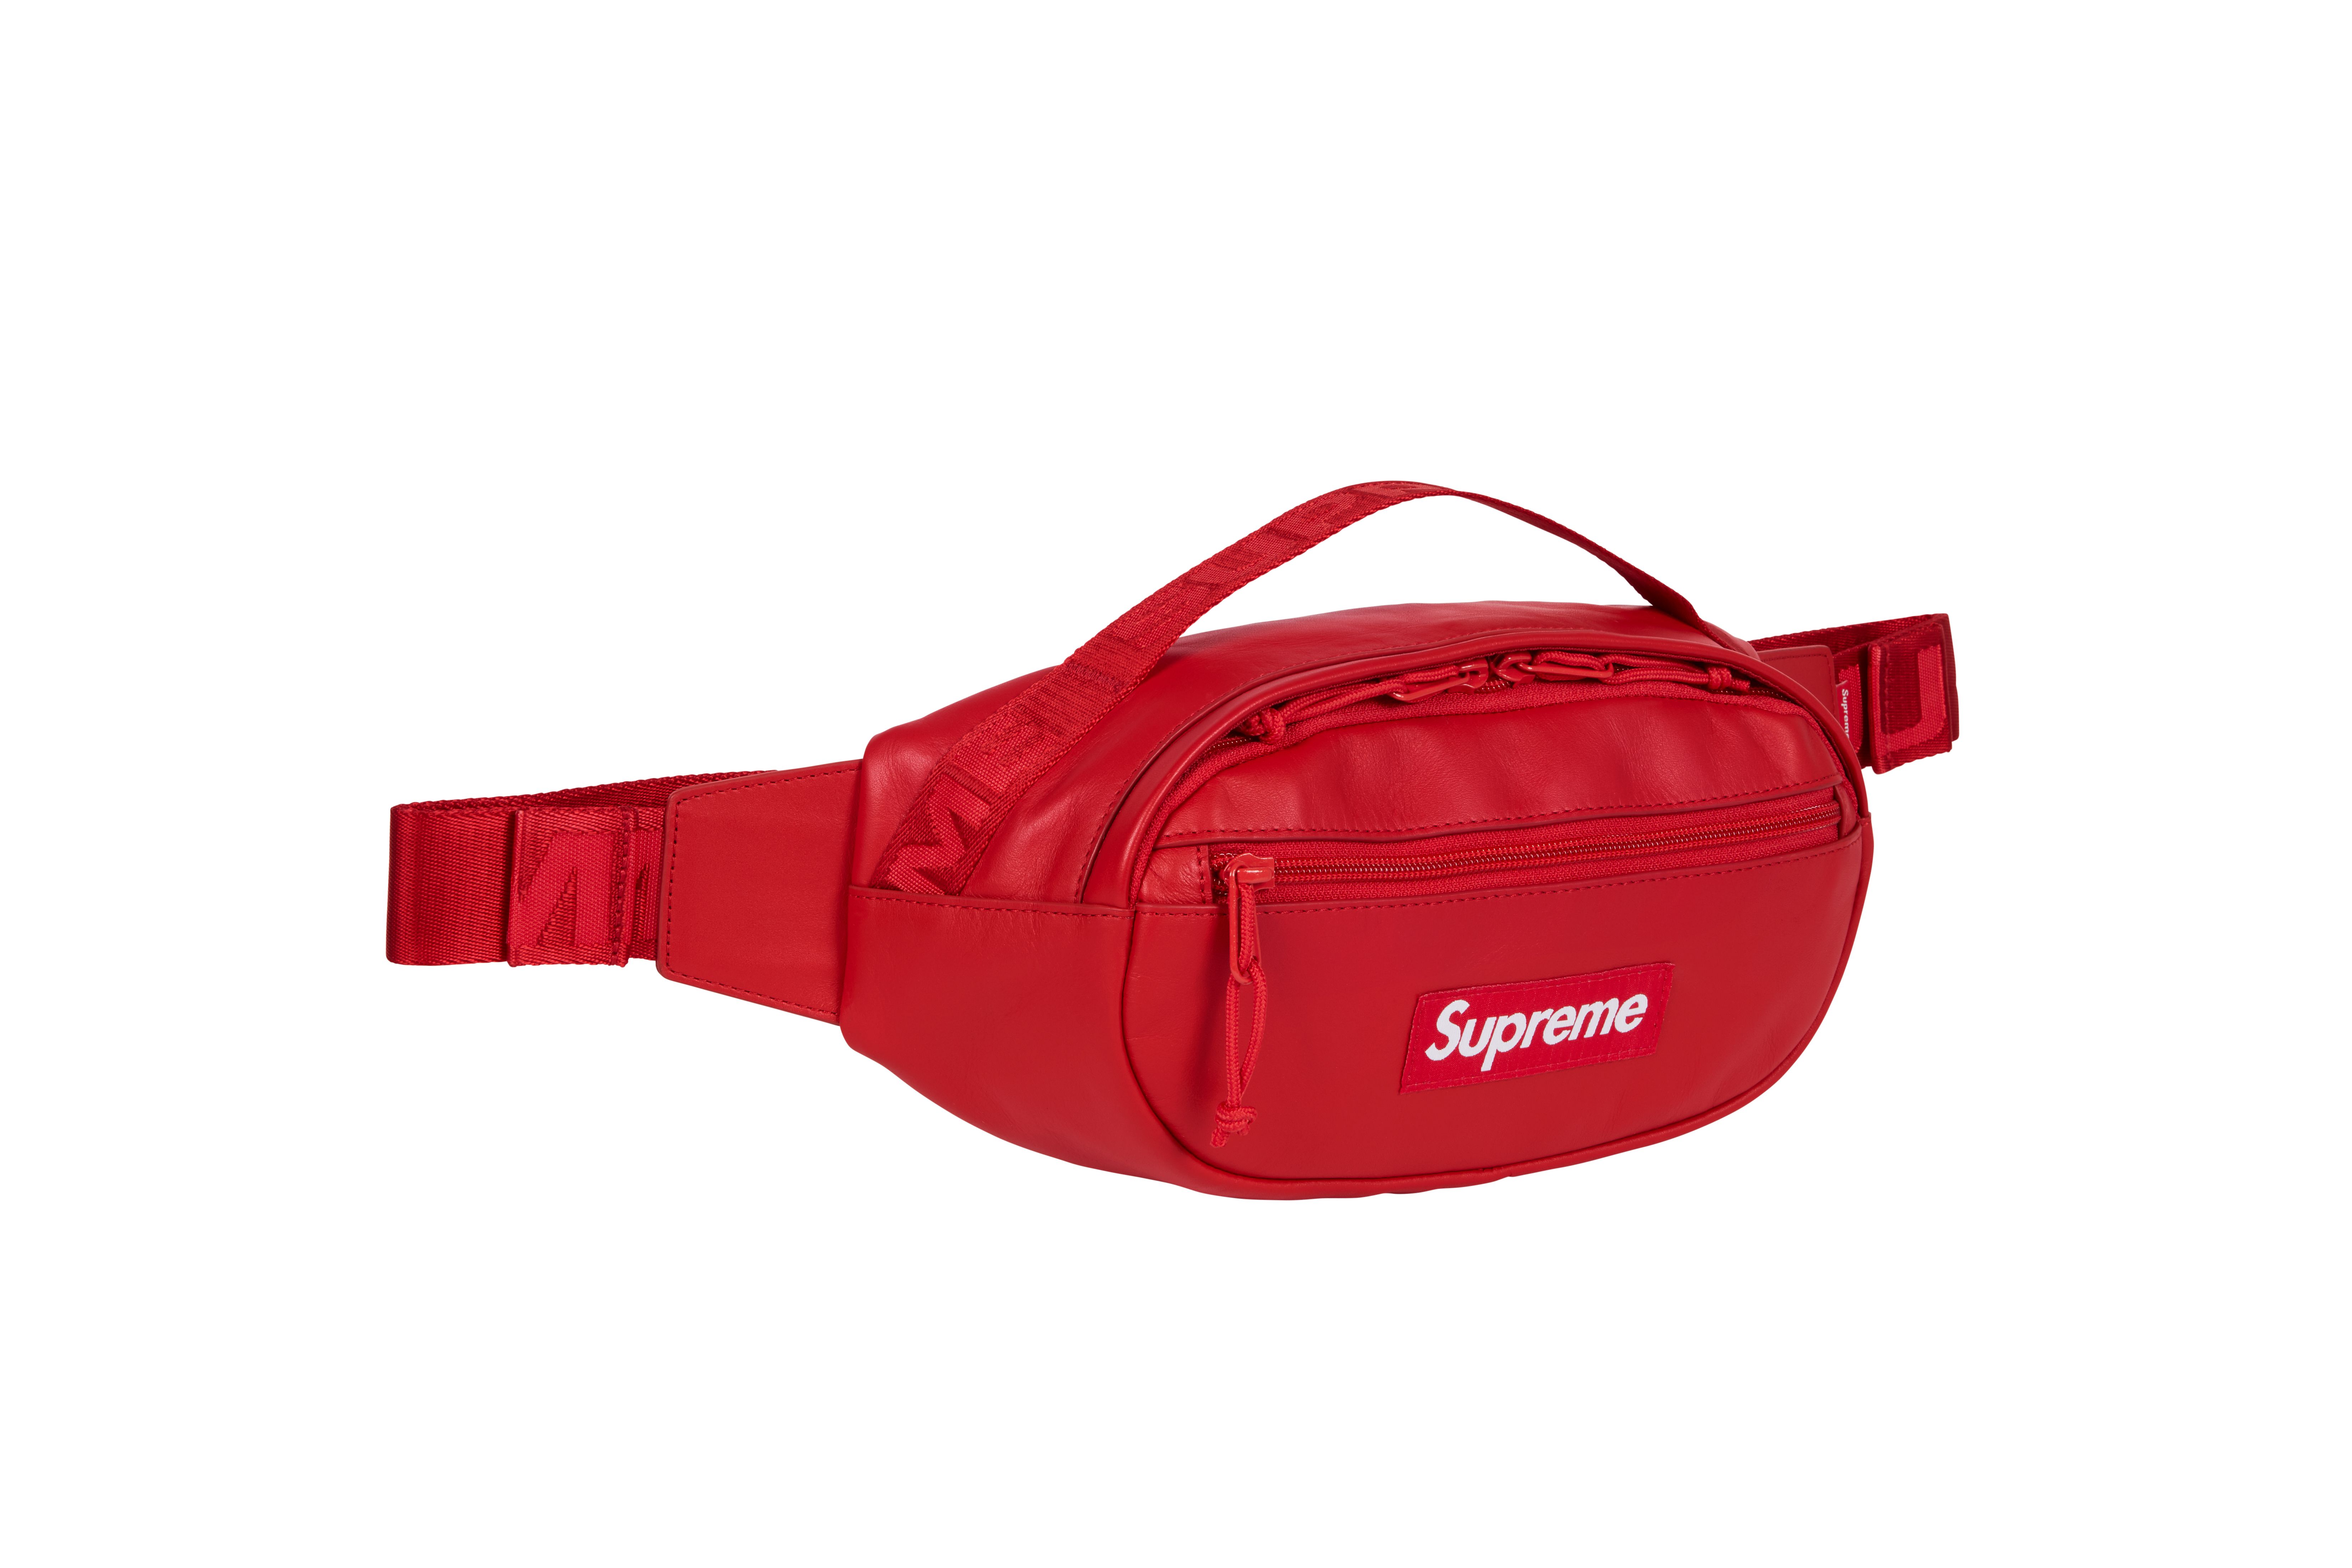 Supreme Leather Waist Bags & Fanny Packs